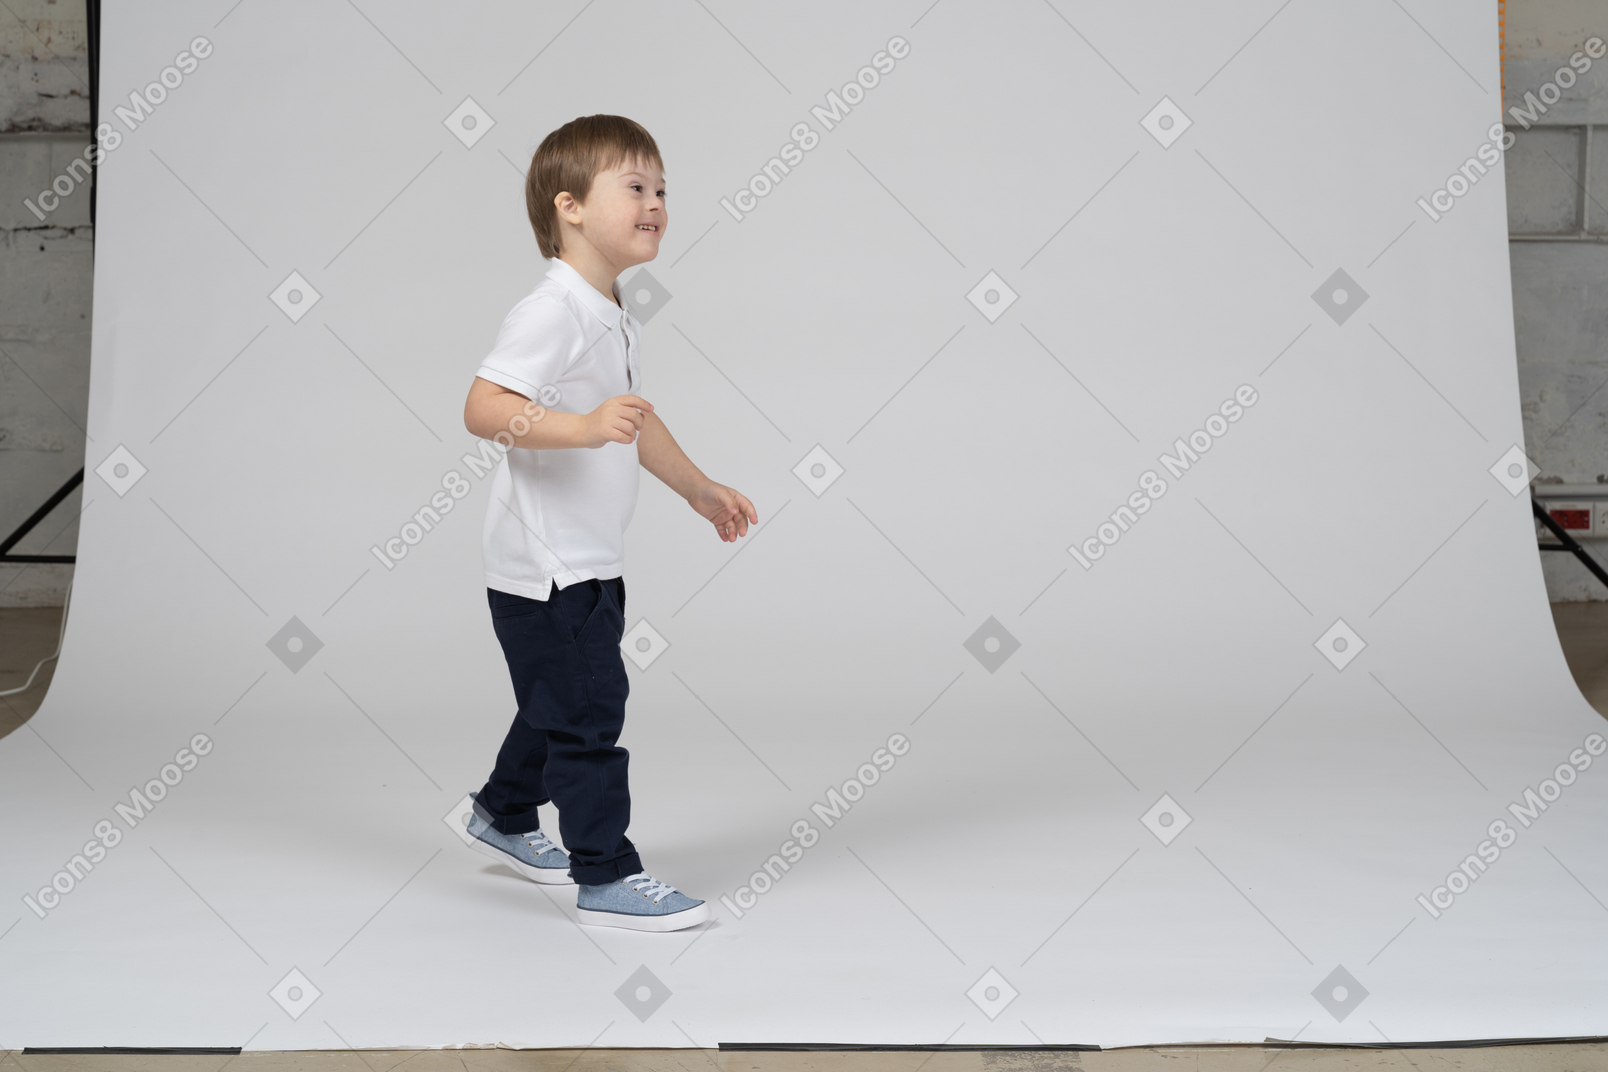 Side view of cheerful boy walking